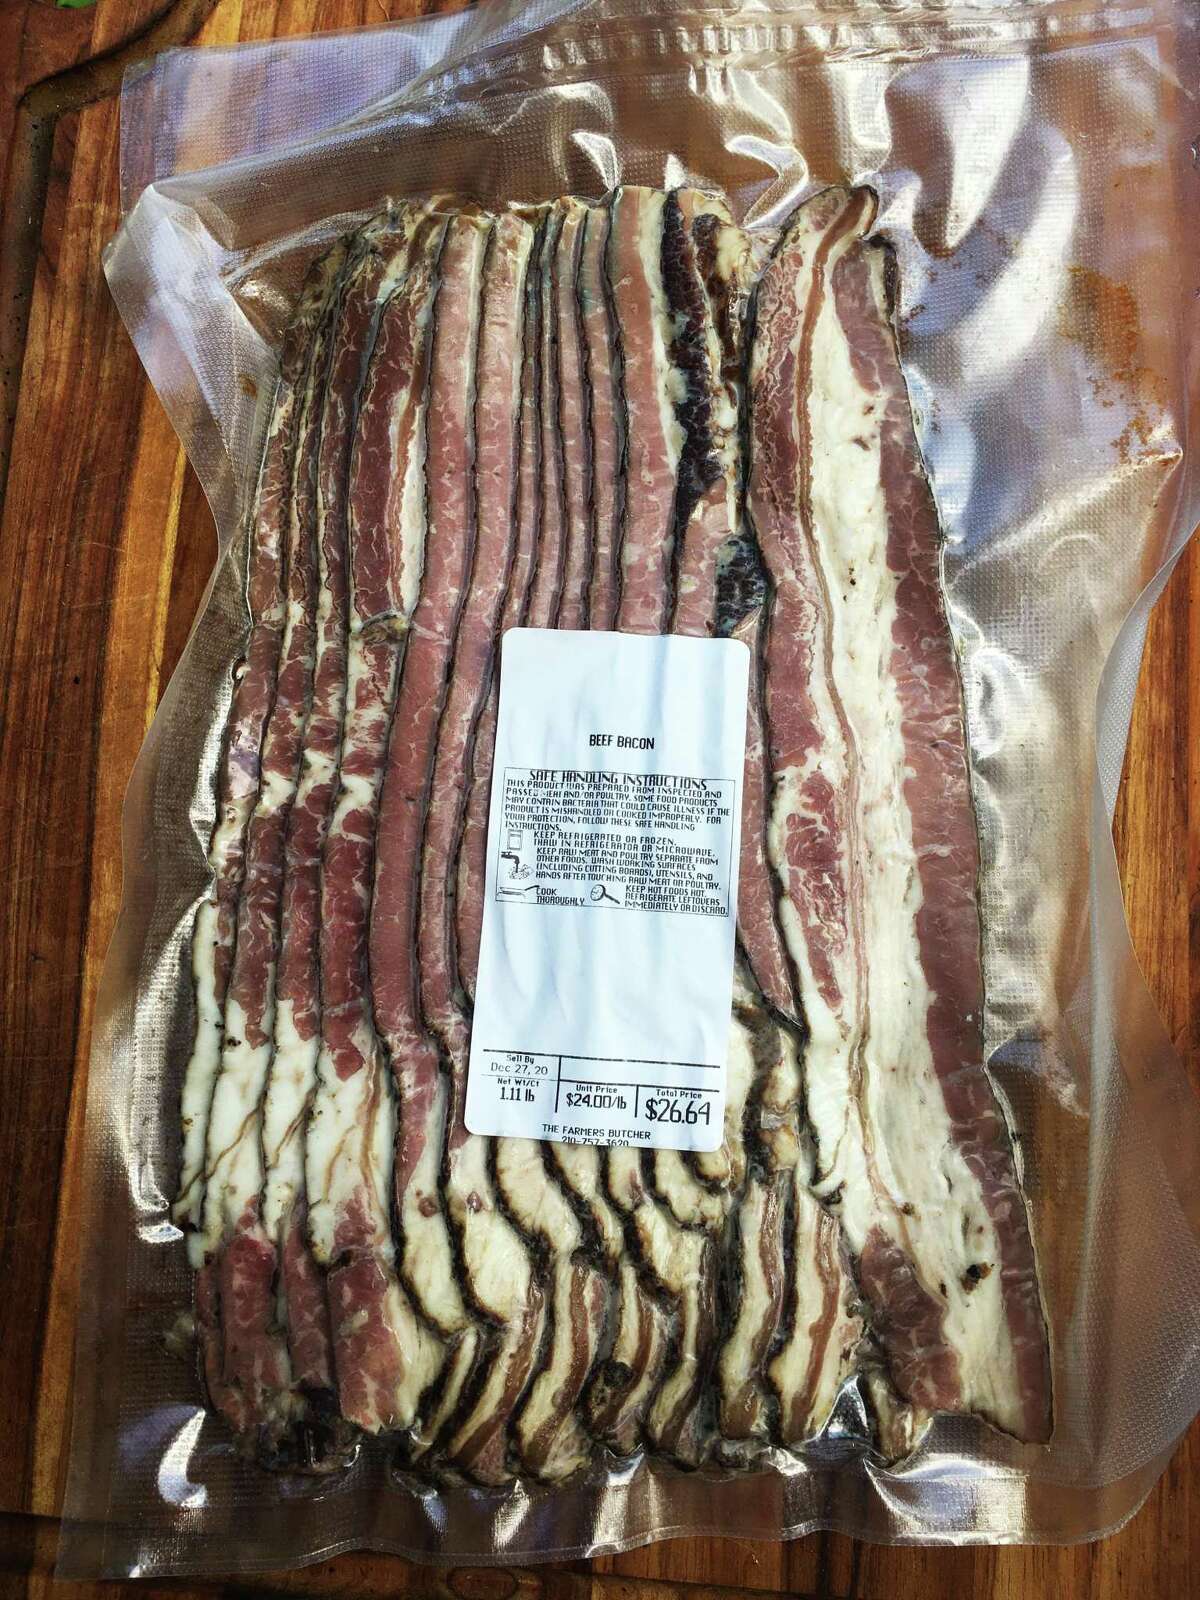 Some unique eats at The Farmers Butcher include beef bacon, which is larger than traditional pork bacon, but tastes very similar.